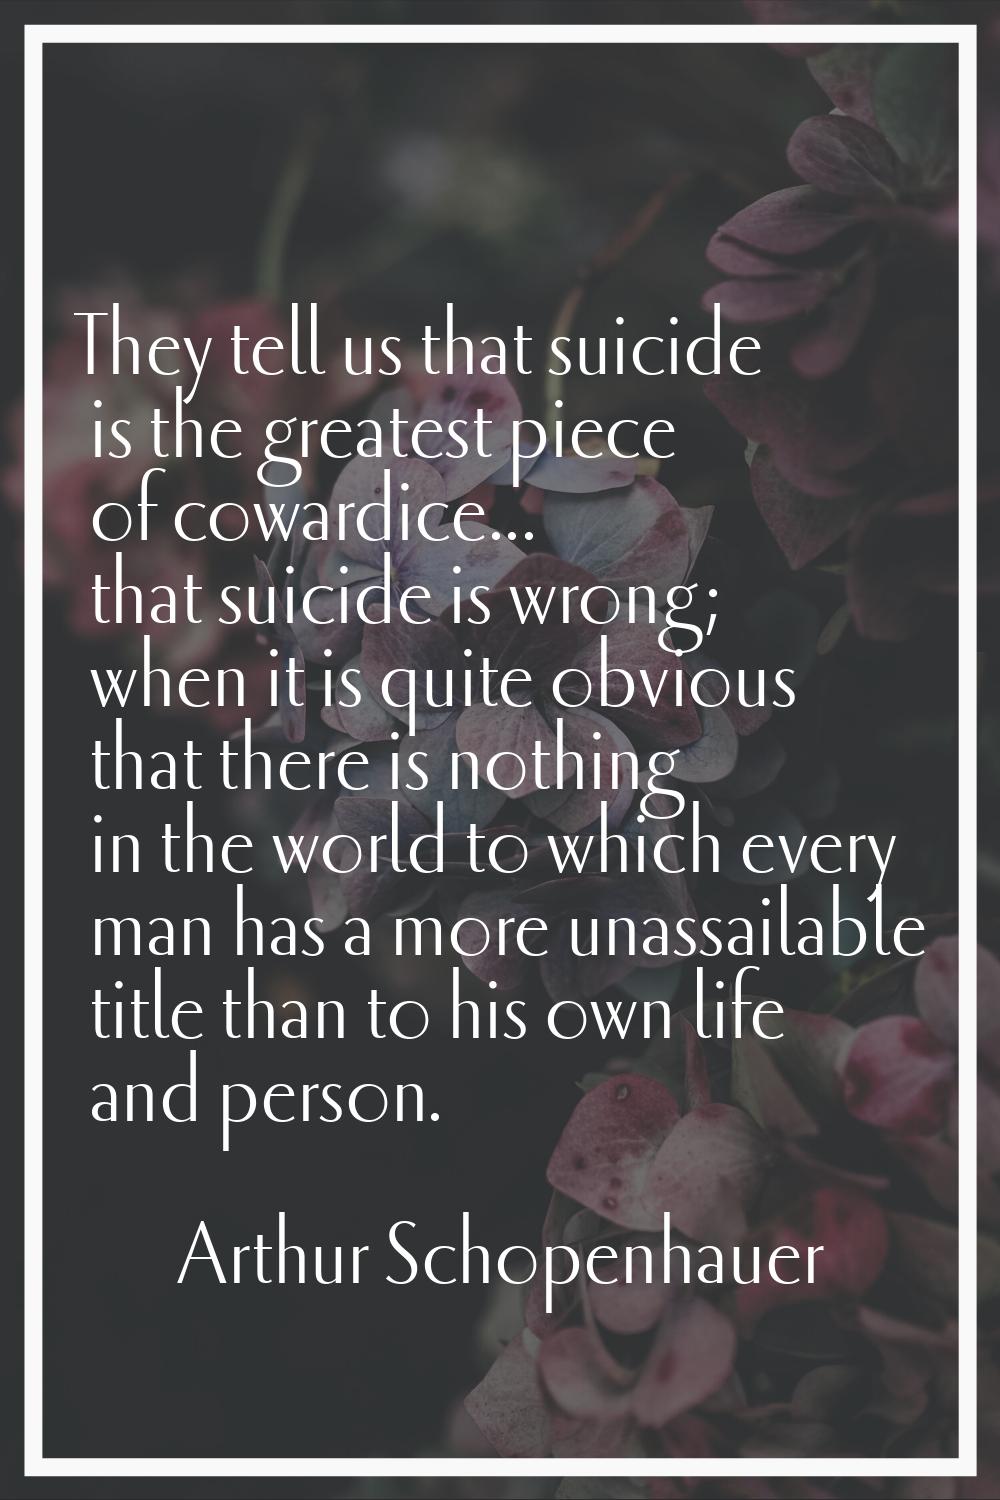 They tell us that suicide is the greatest piece of cowardice... that suicide is wrong; when it is q